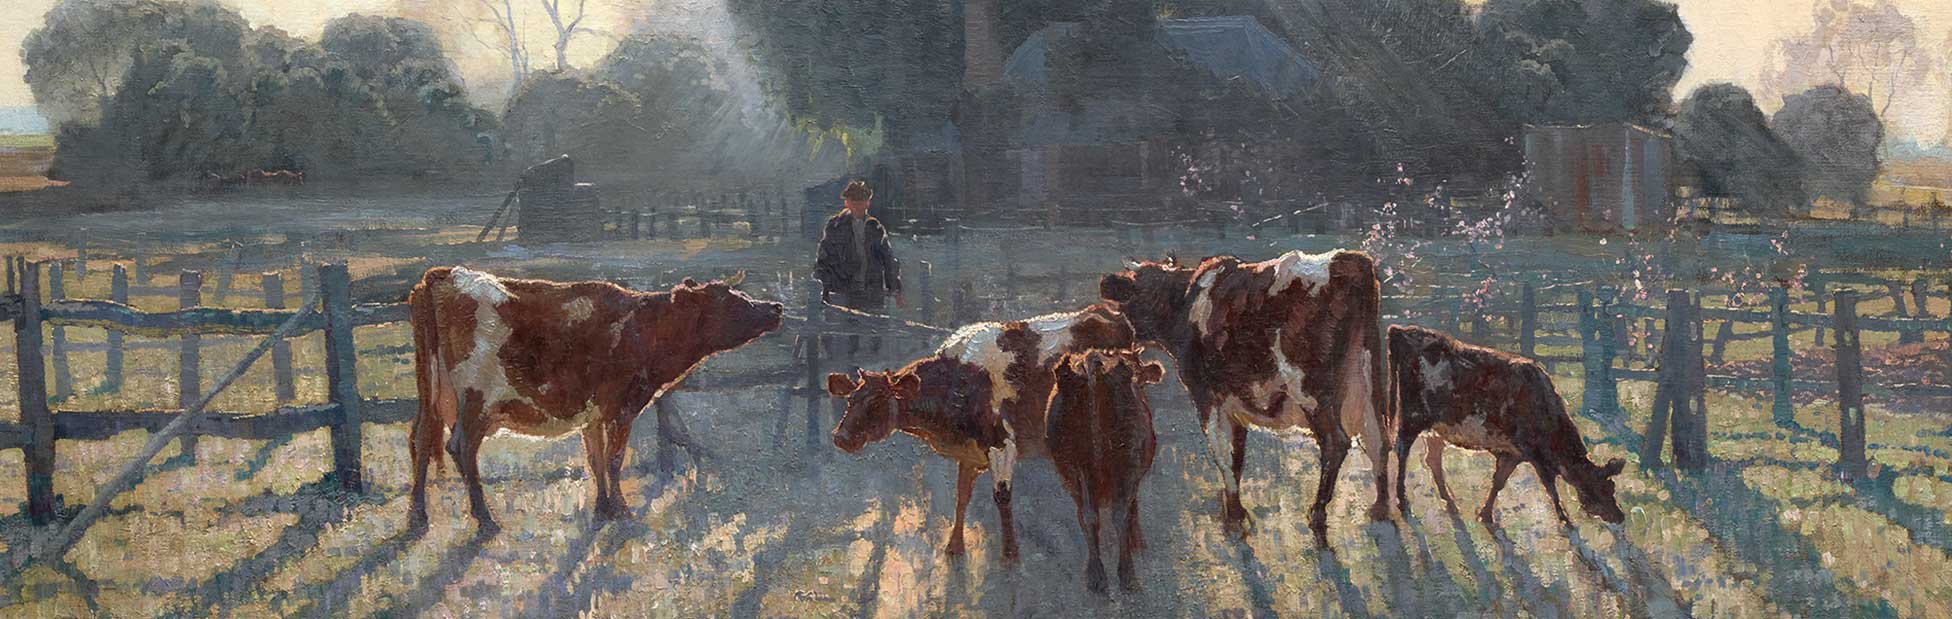 Image of 'Spring frost' by Gunner, farmer walking from house to cows in field